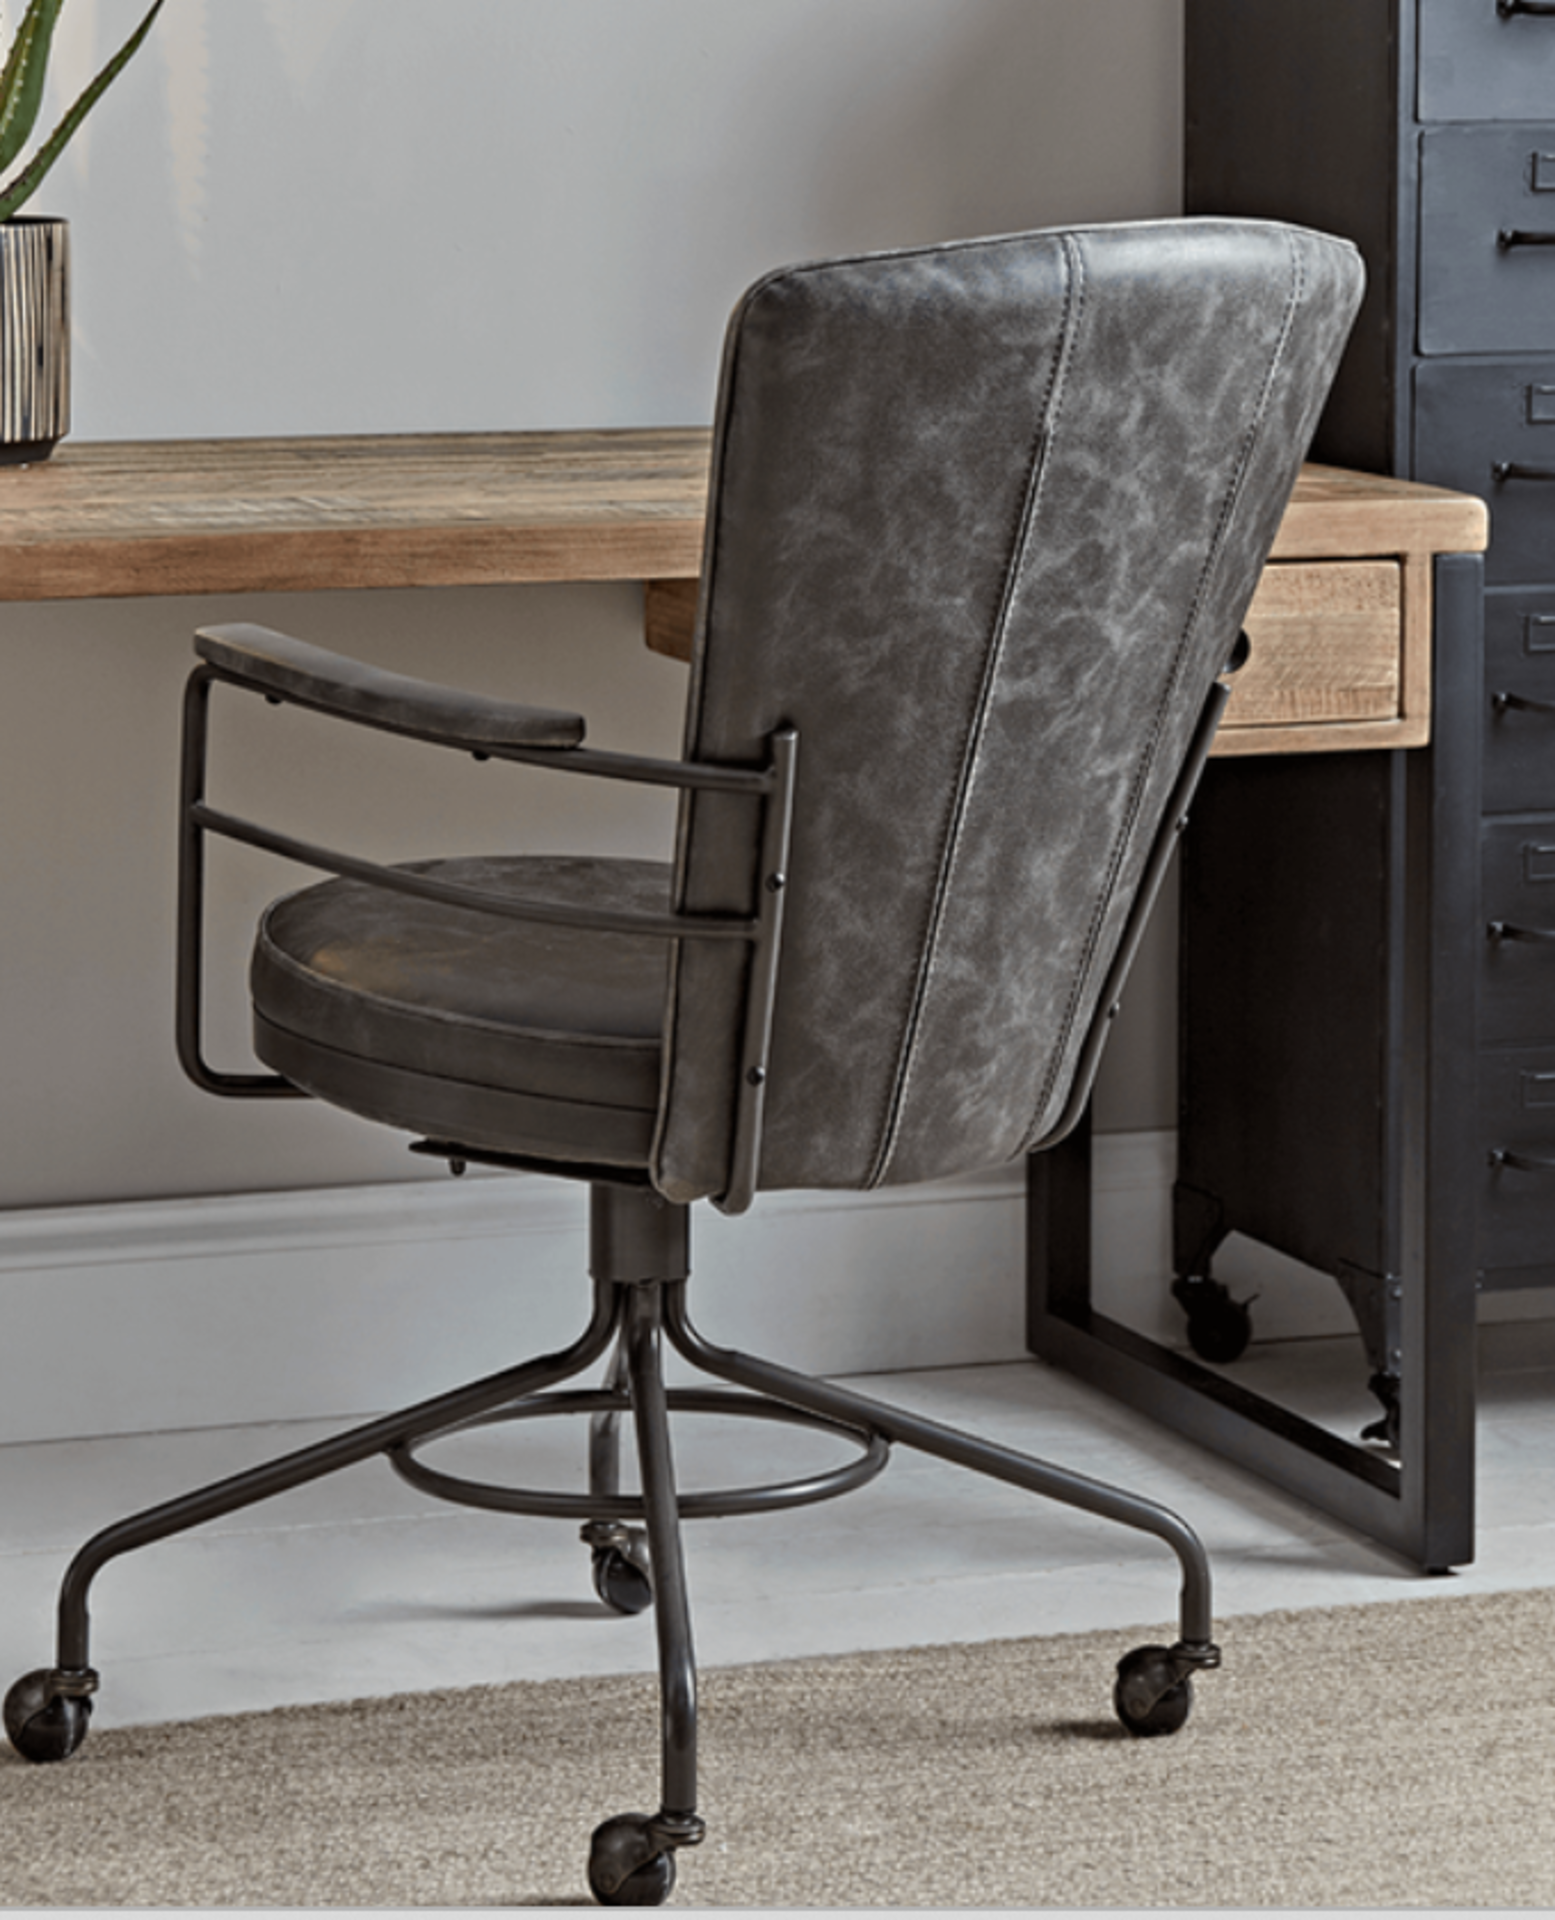 Cox & Cox Industrial Style Office Chair - Grey. RRP £375.00. - SR6. With a bold metal frame and